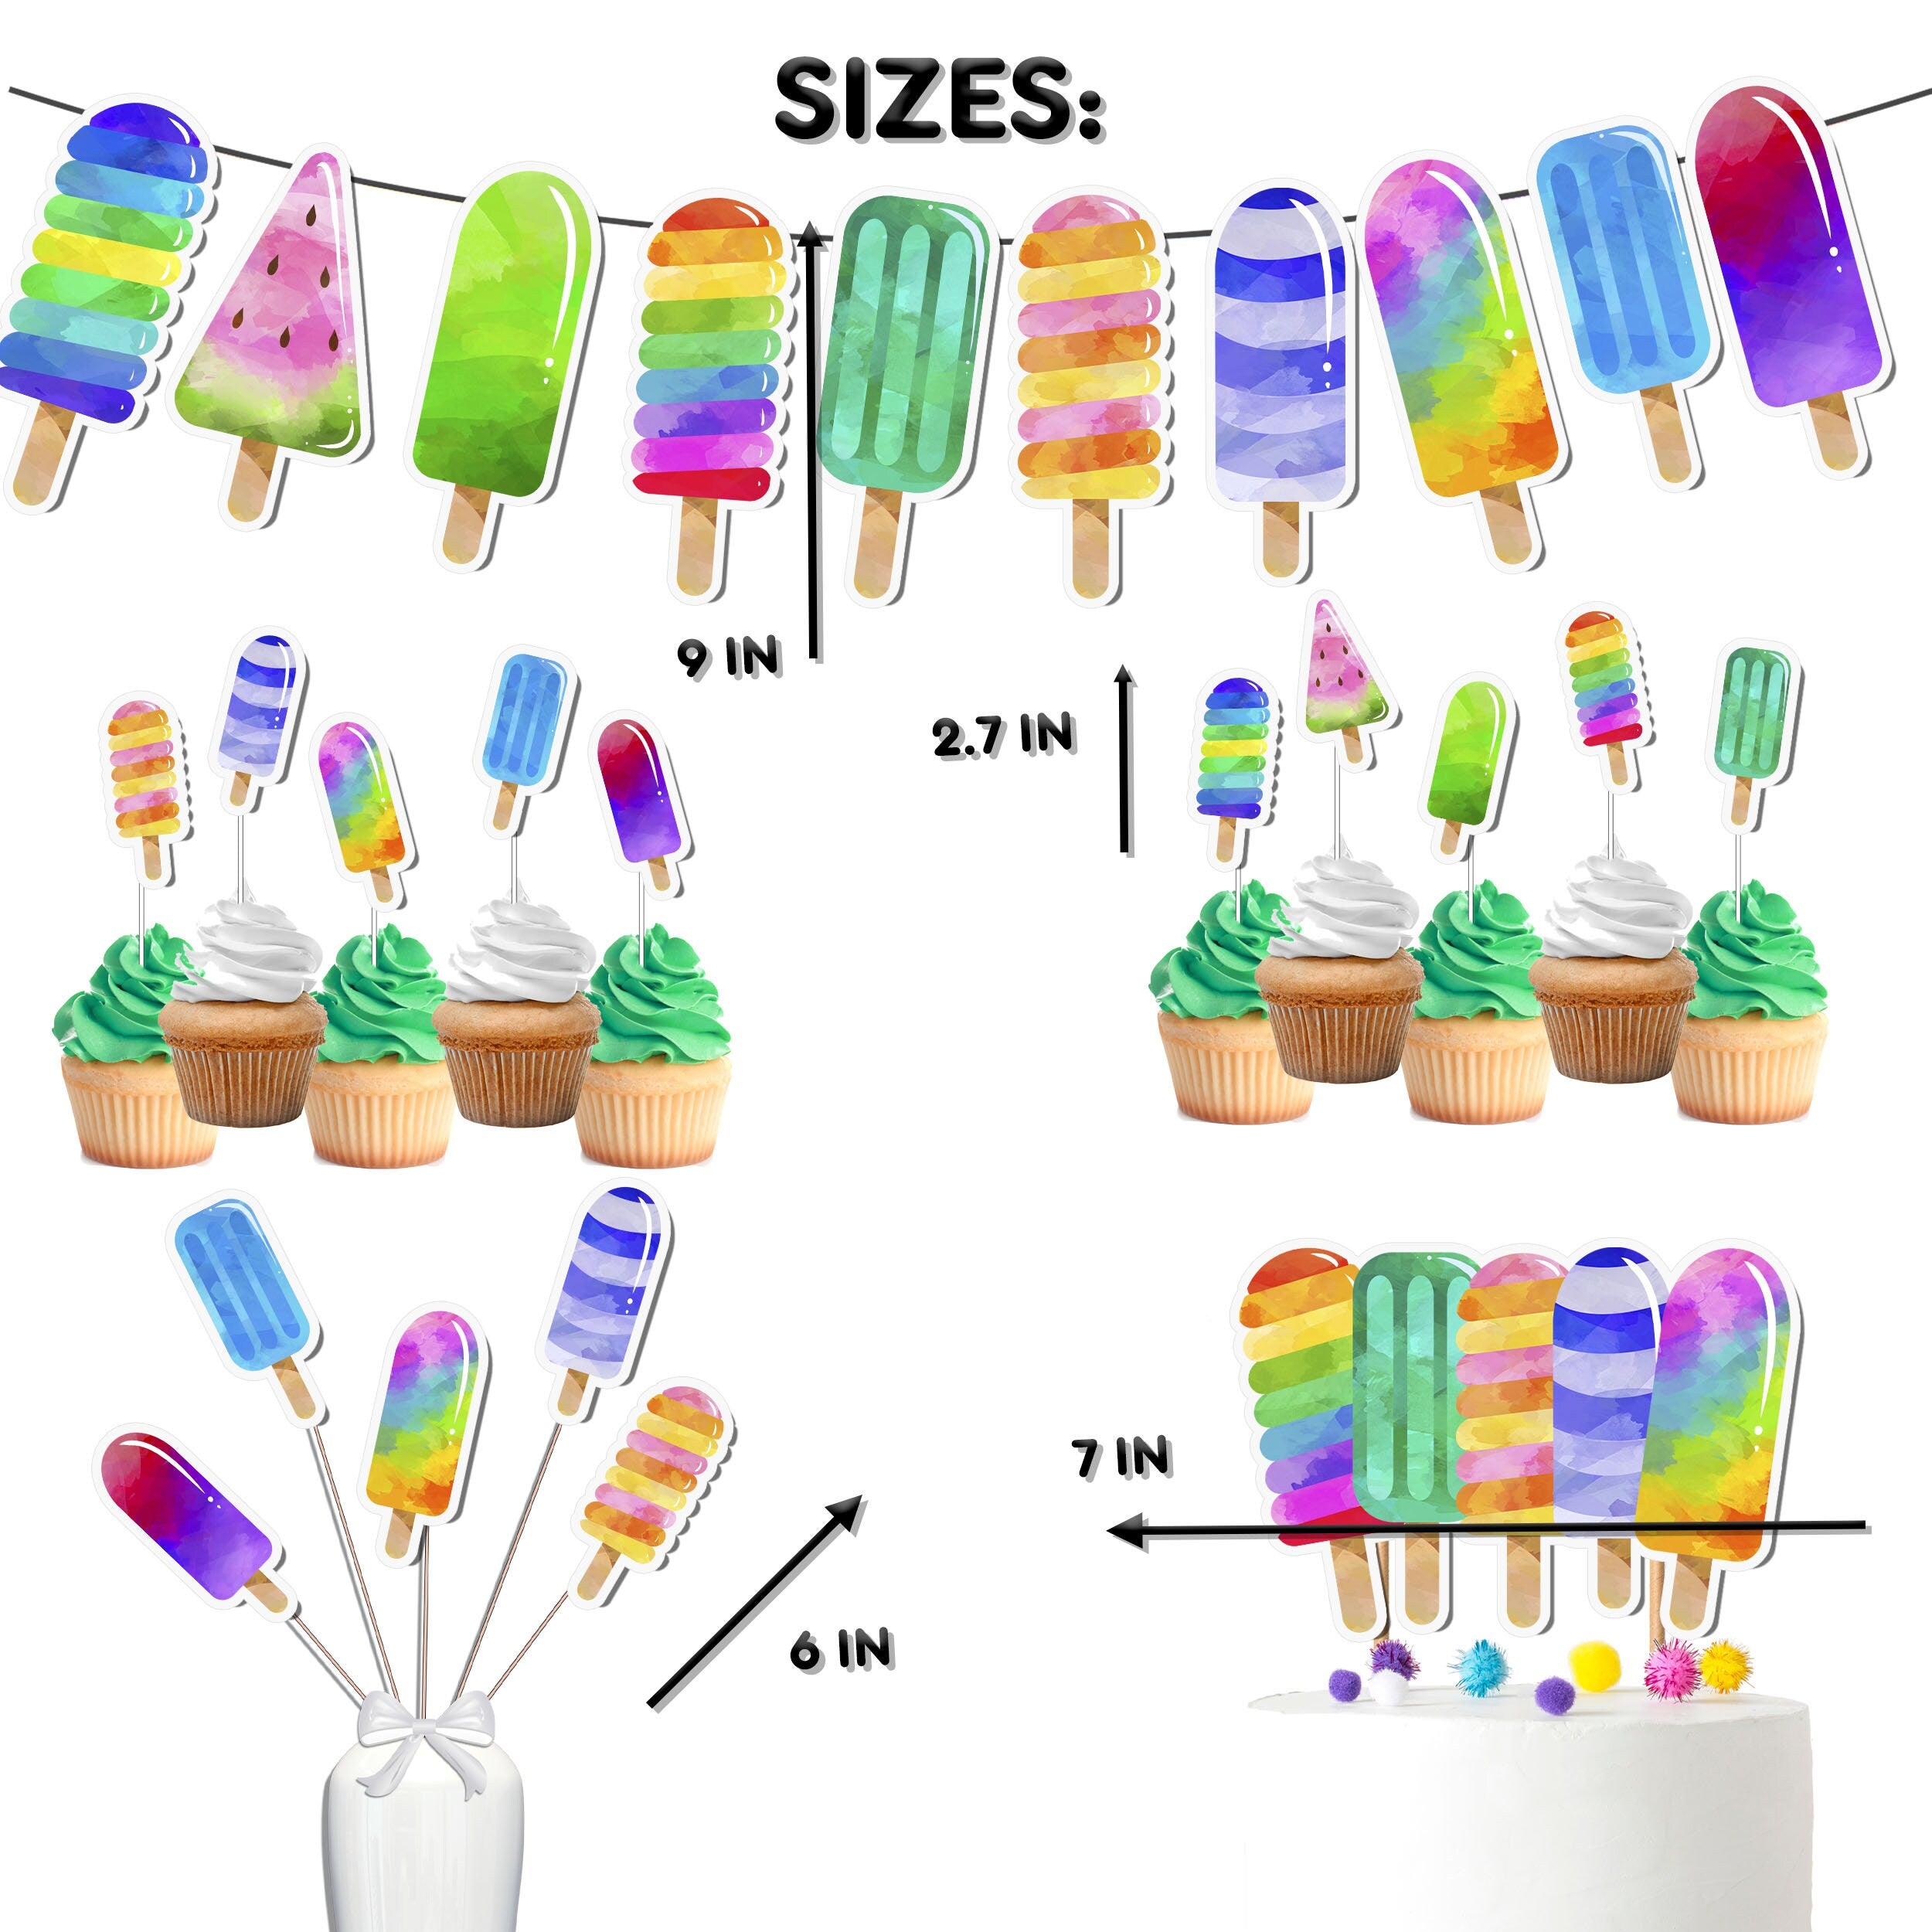 Colorful Ice Cream Party Decor Set - Vibrant Cake Topper, Cupcake Toppers, Centerpieces & Banner - Scoop Up Fun for a Sweet Birthday Bash